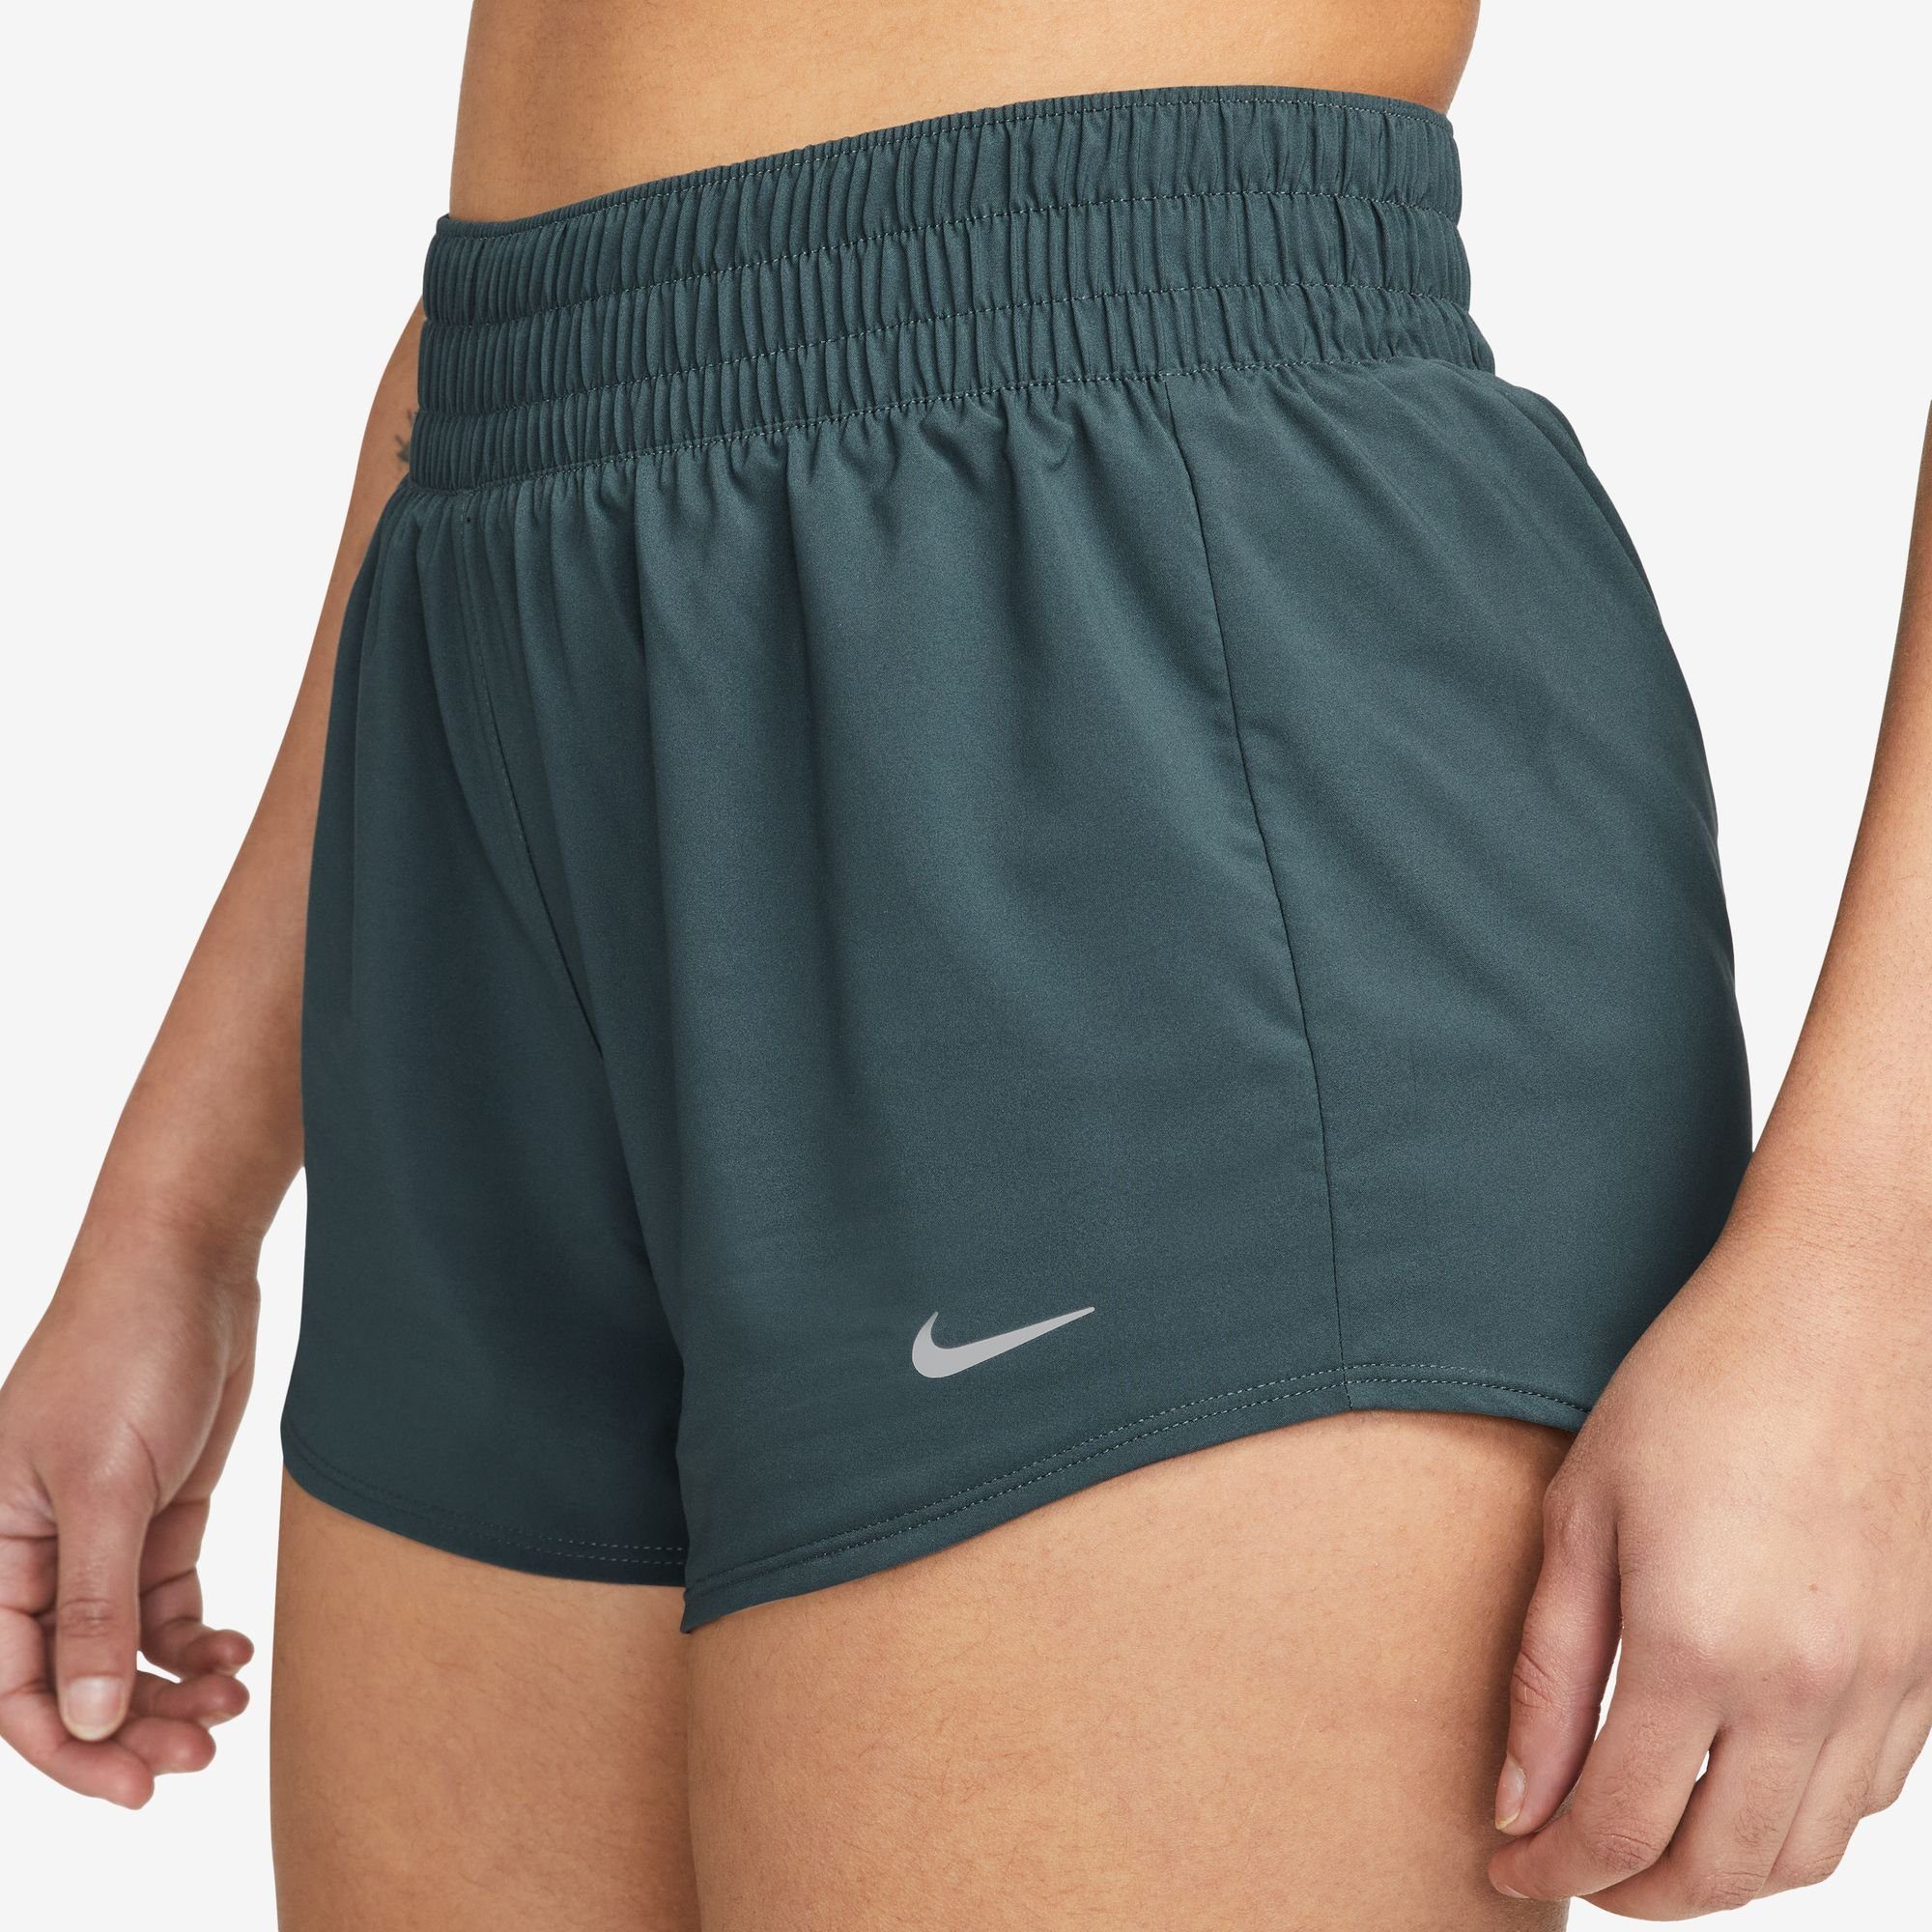 Nike JUNGLE/REFLECTIVE DRI-FIT Trainingsshorts DEEP WOMEN'S SHORTS ONE BRIEF-LINED MID-RISE SILV